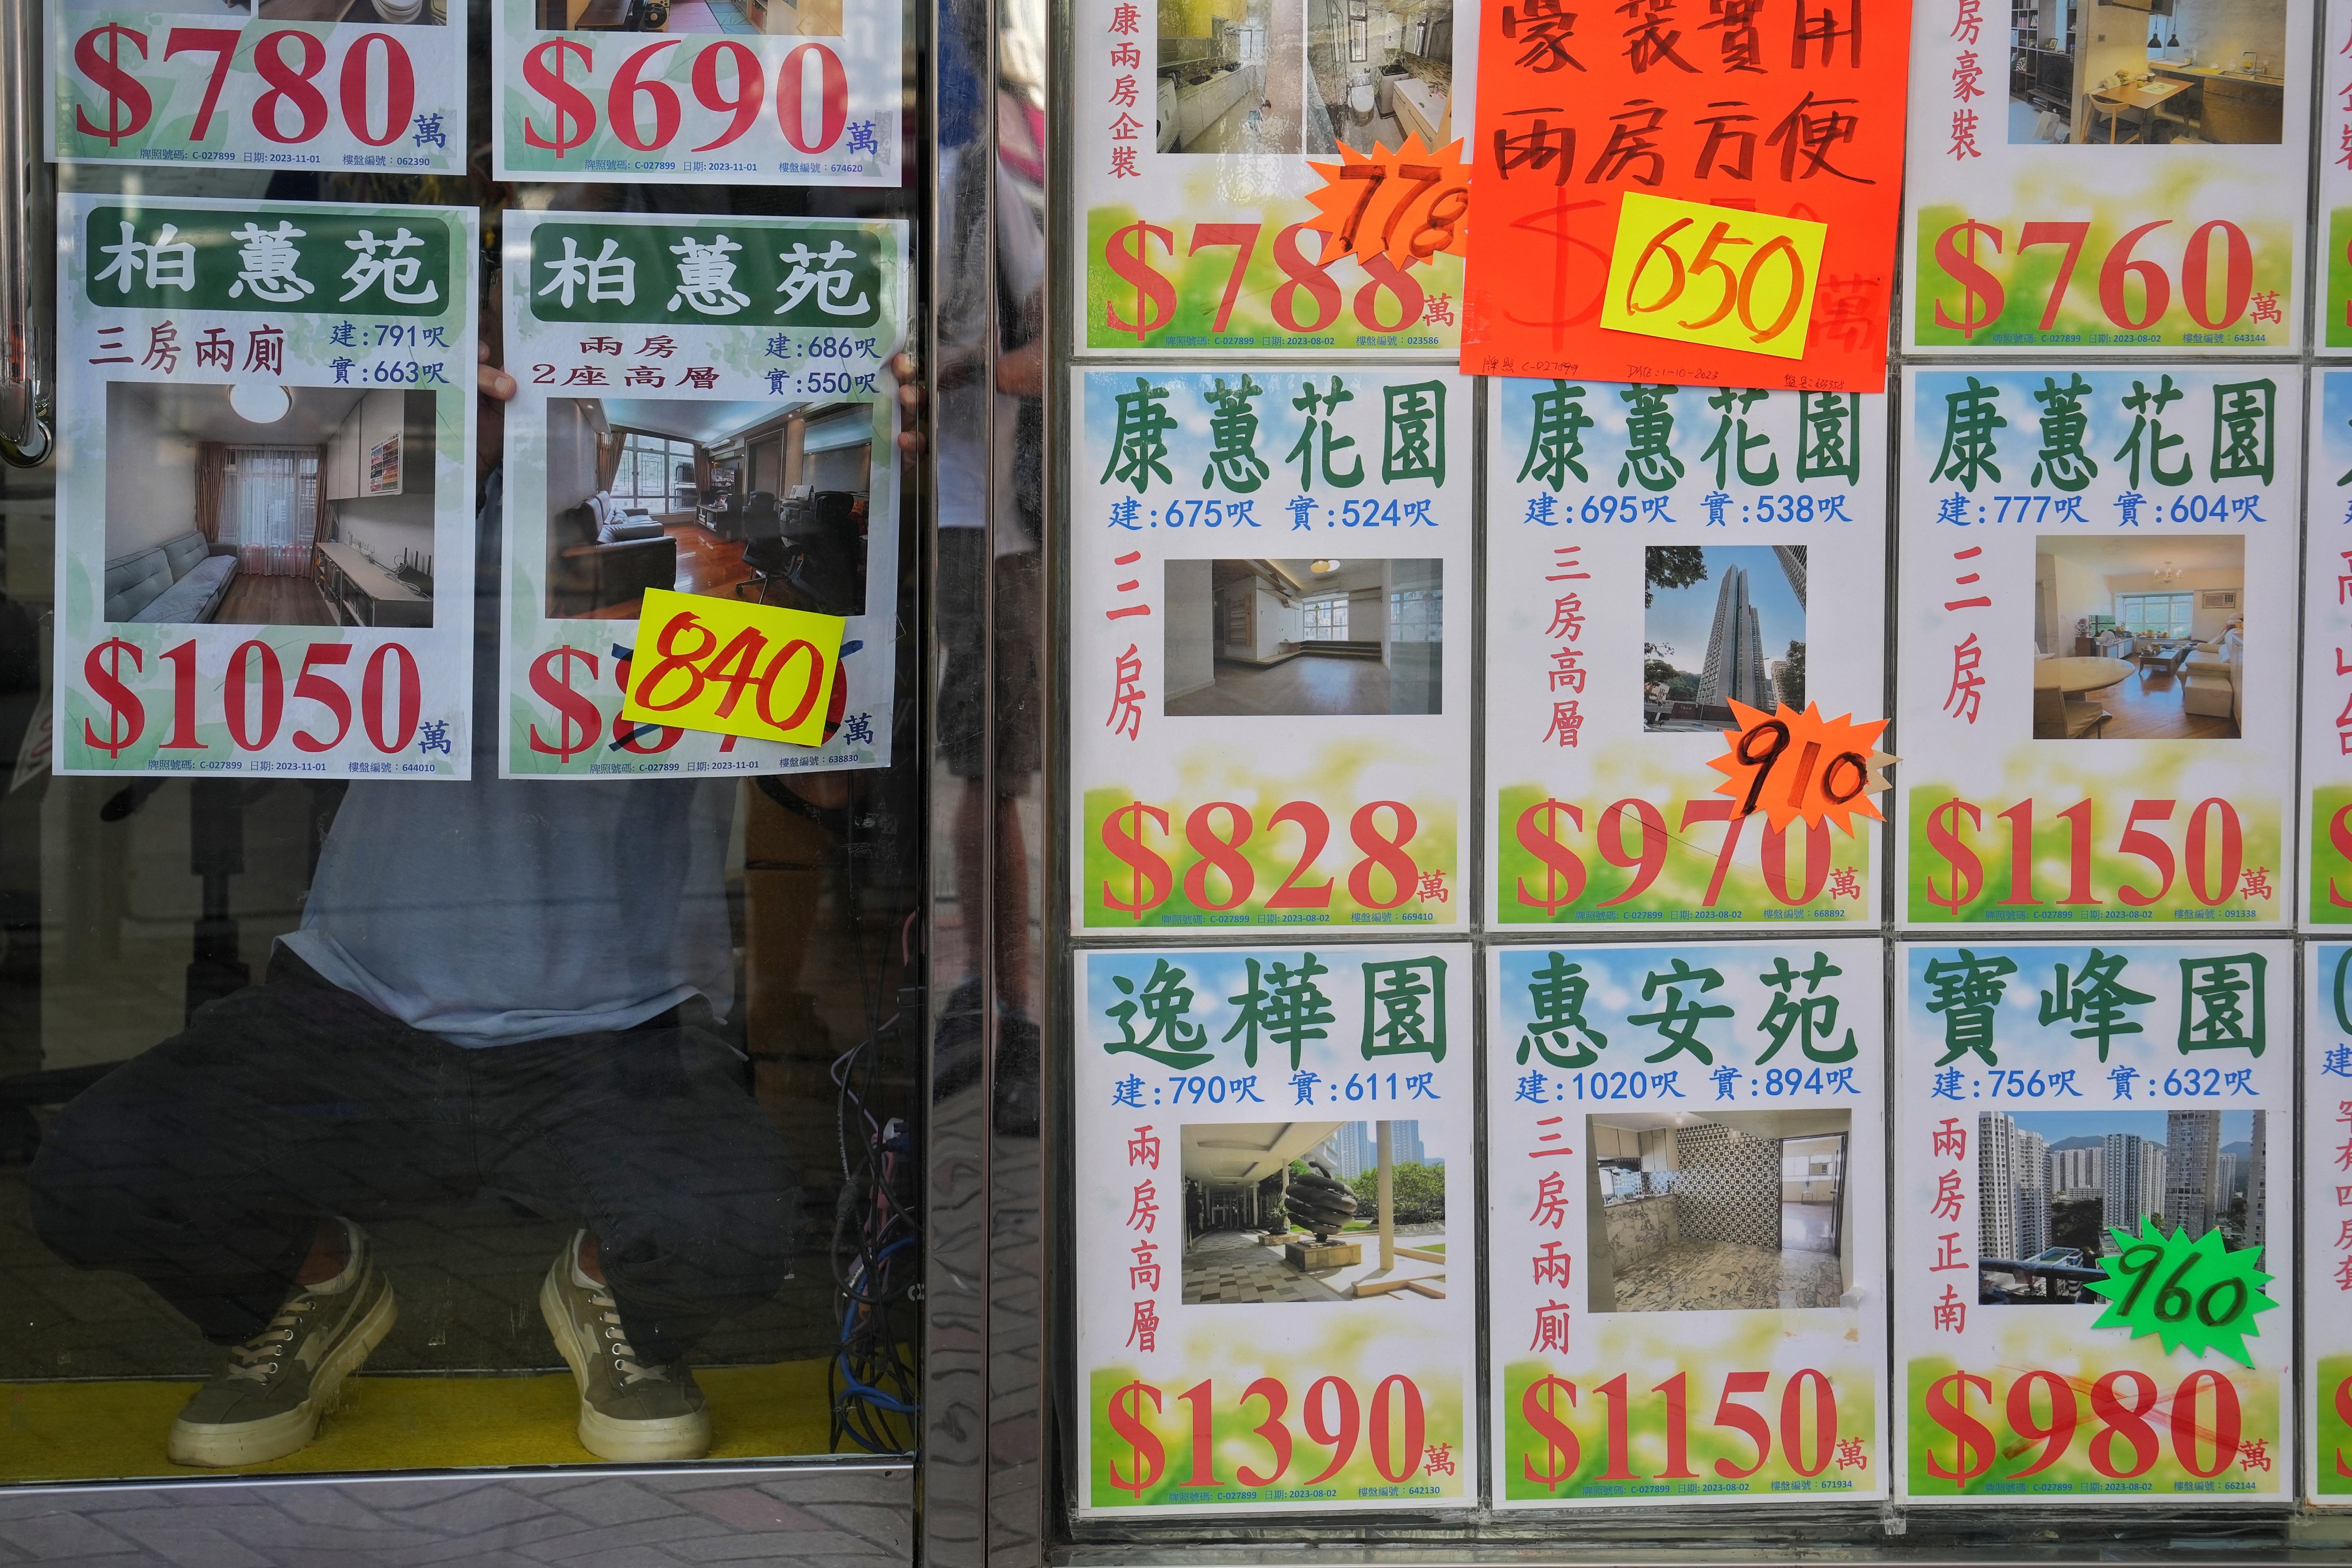 There are 18,300 unsold homes in the market, the most since 2007, according to property consultancy JLL. Photo: Elson LI